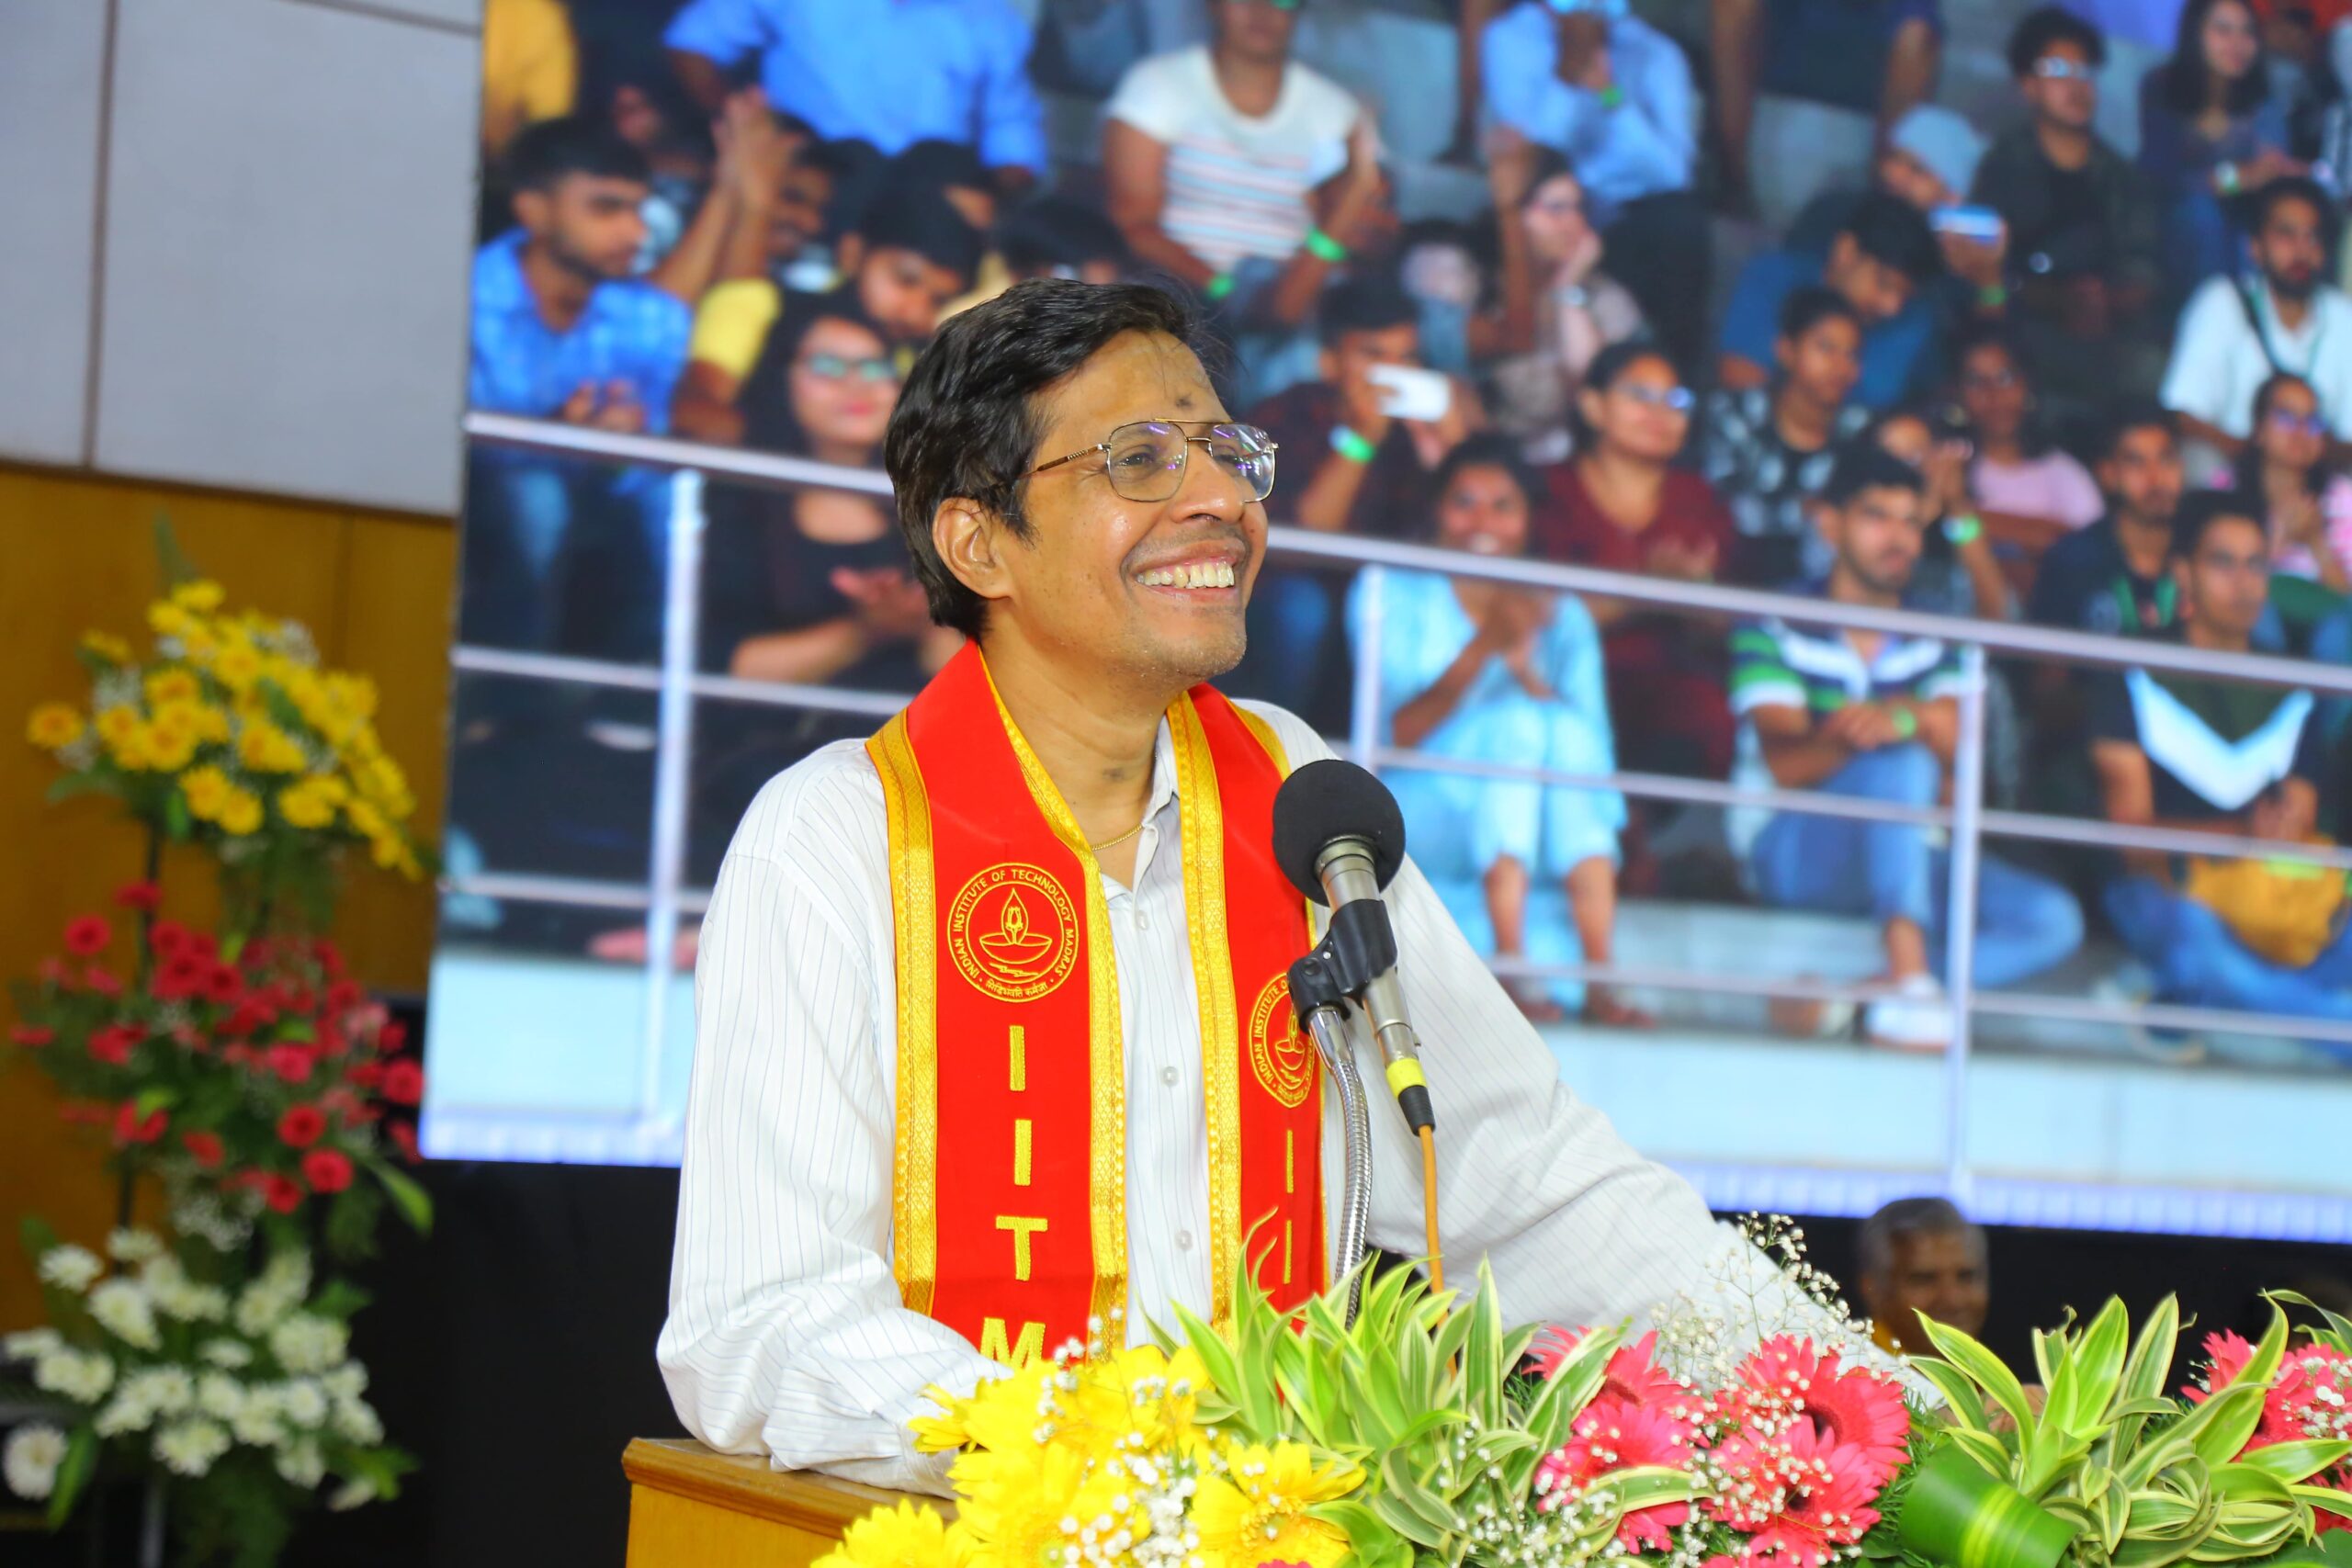 IIT Madras conducts - Diploma / Degree Distribution Ceremony for